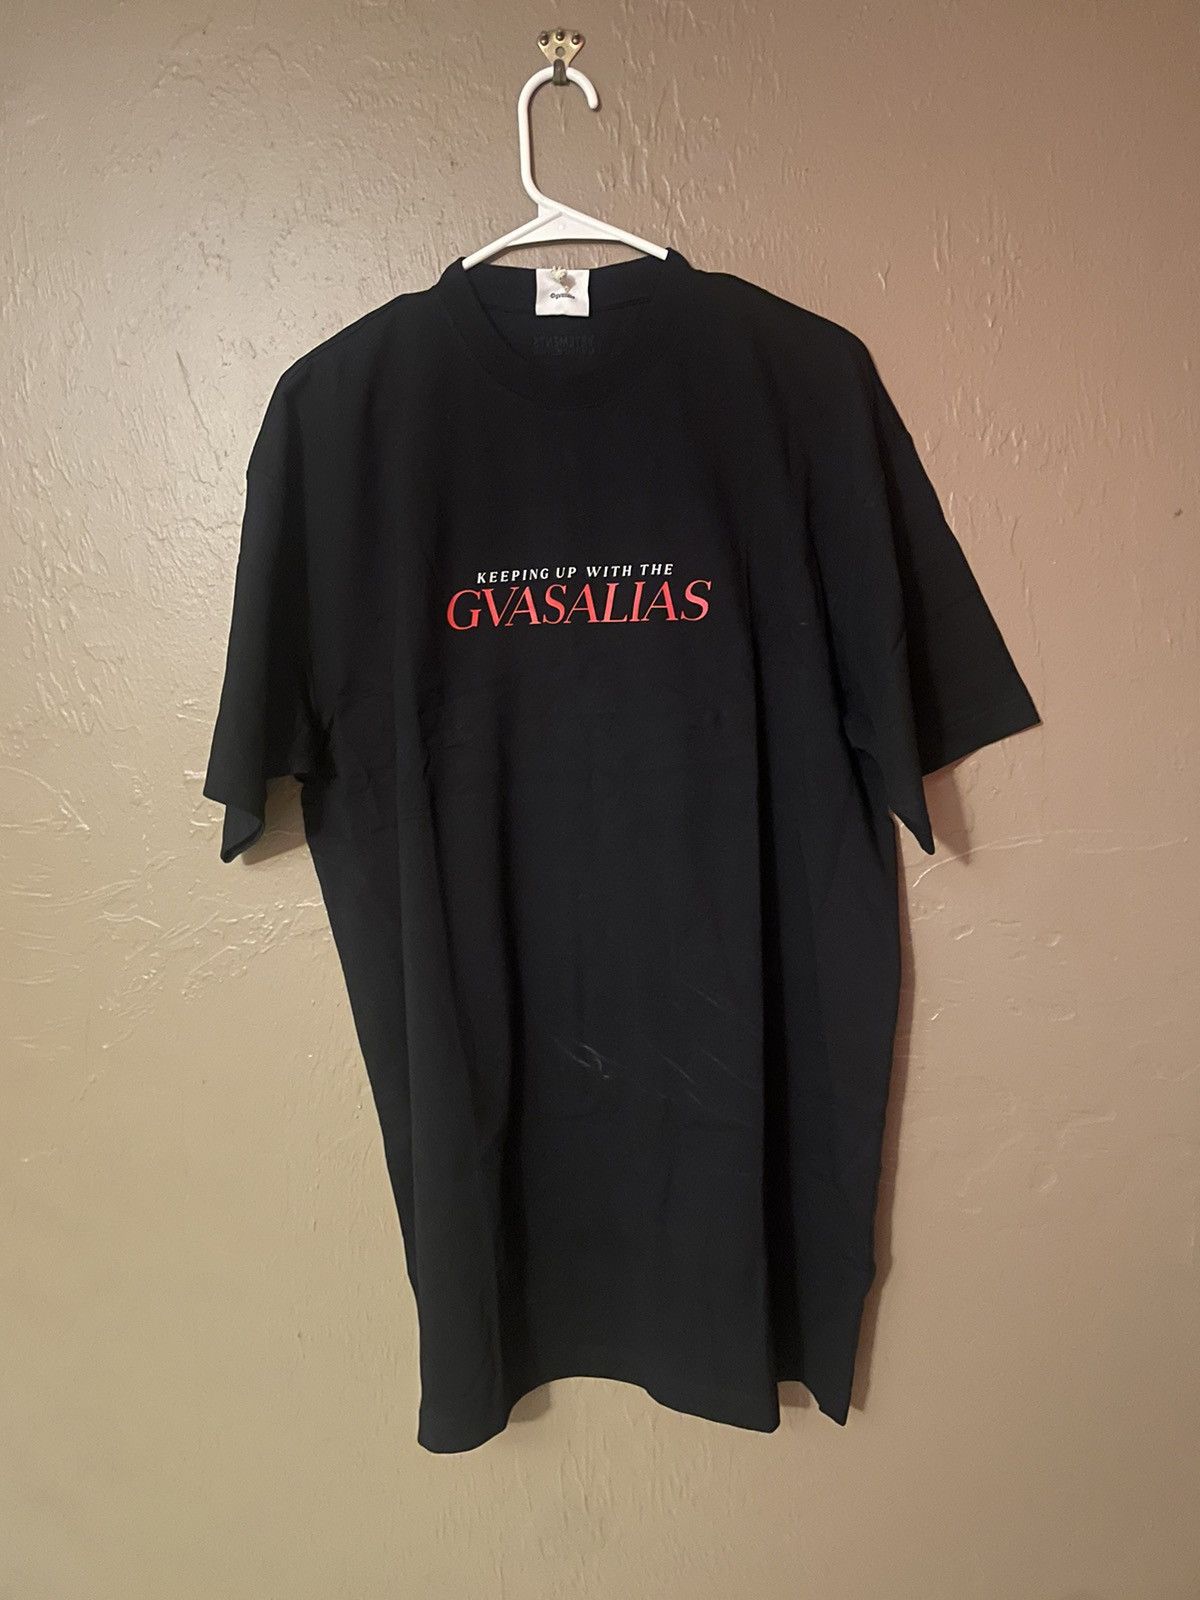 Vetements Black 'Keeping Up With The Gvasalias' T-Shirt